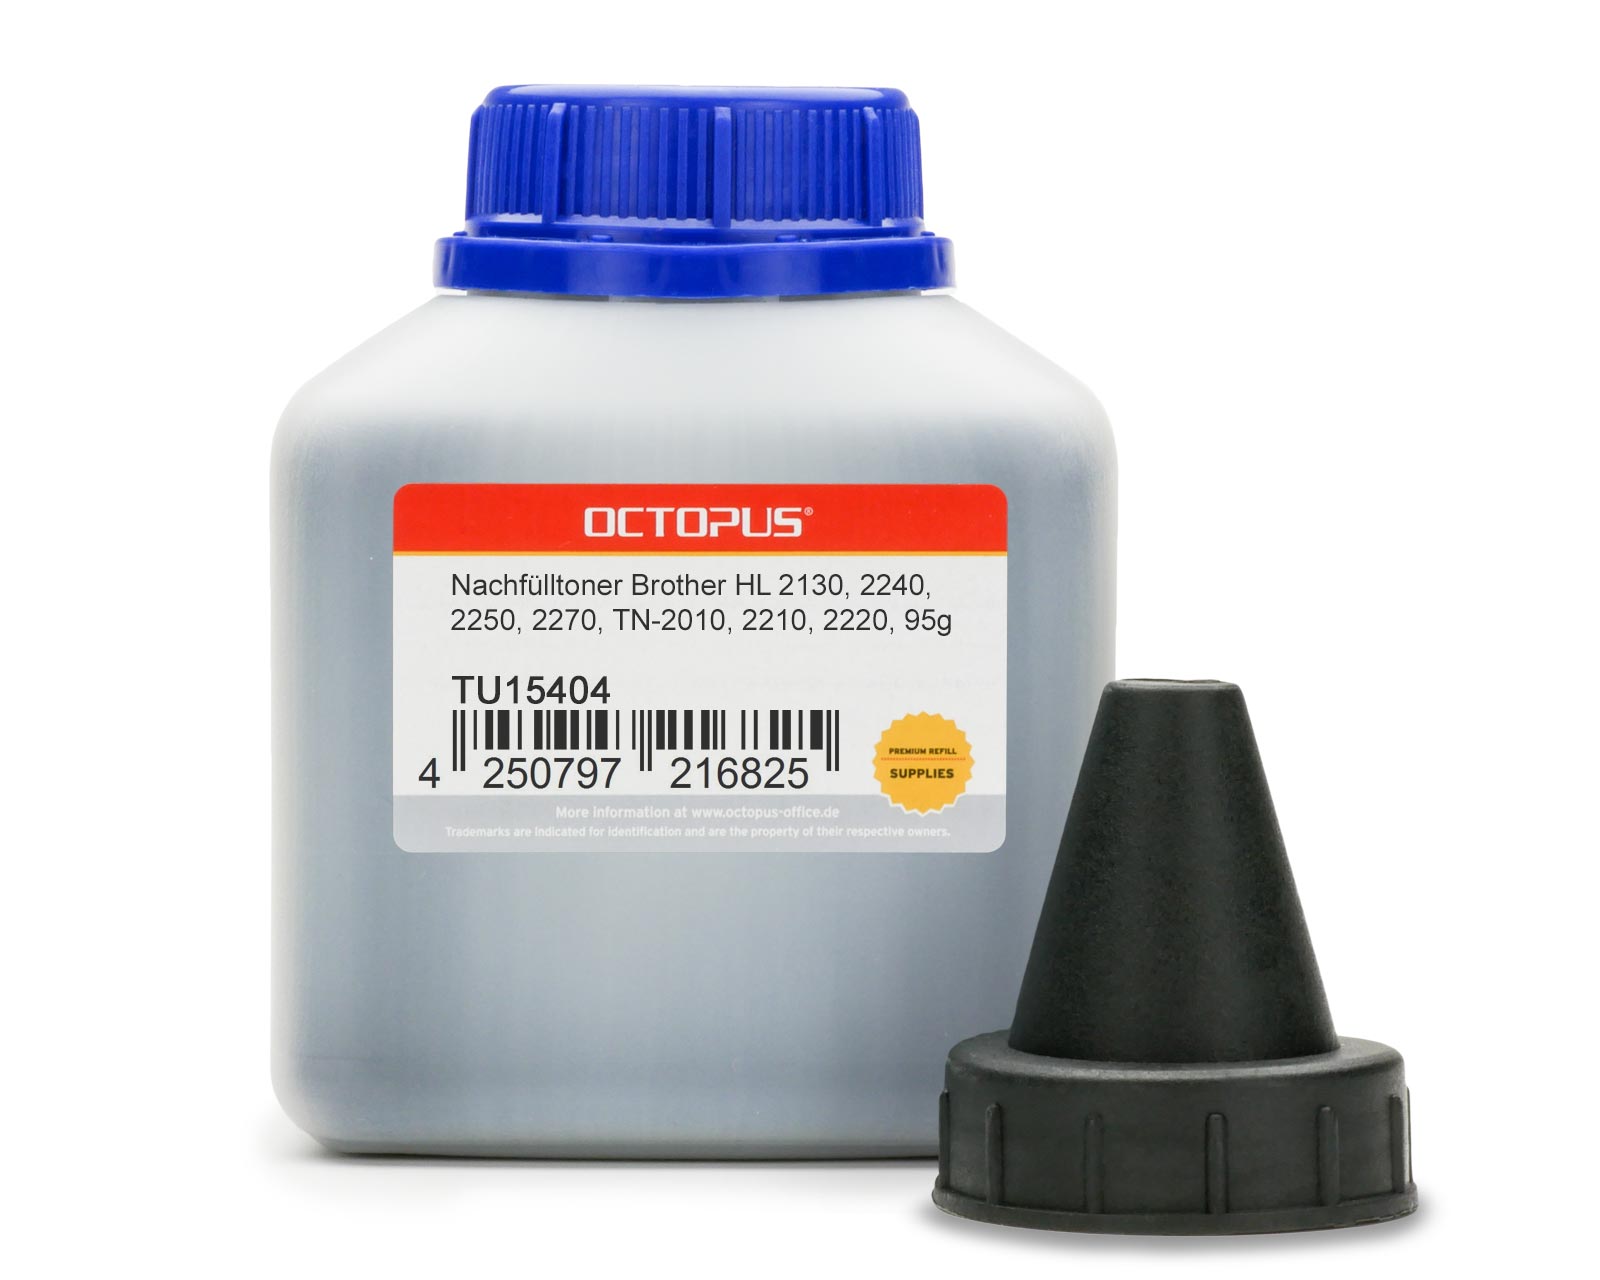 Octopus Refill Toner Powder compatible with Brother HL 2130, 2240, 2250, 2270, TN-2010, TN-2210, TN-2220 (no OEM)